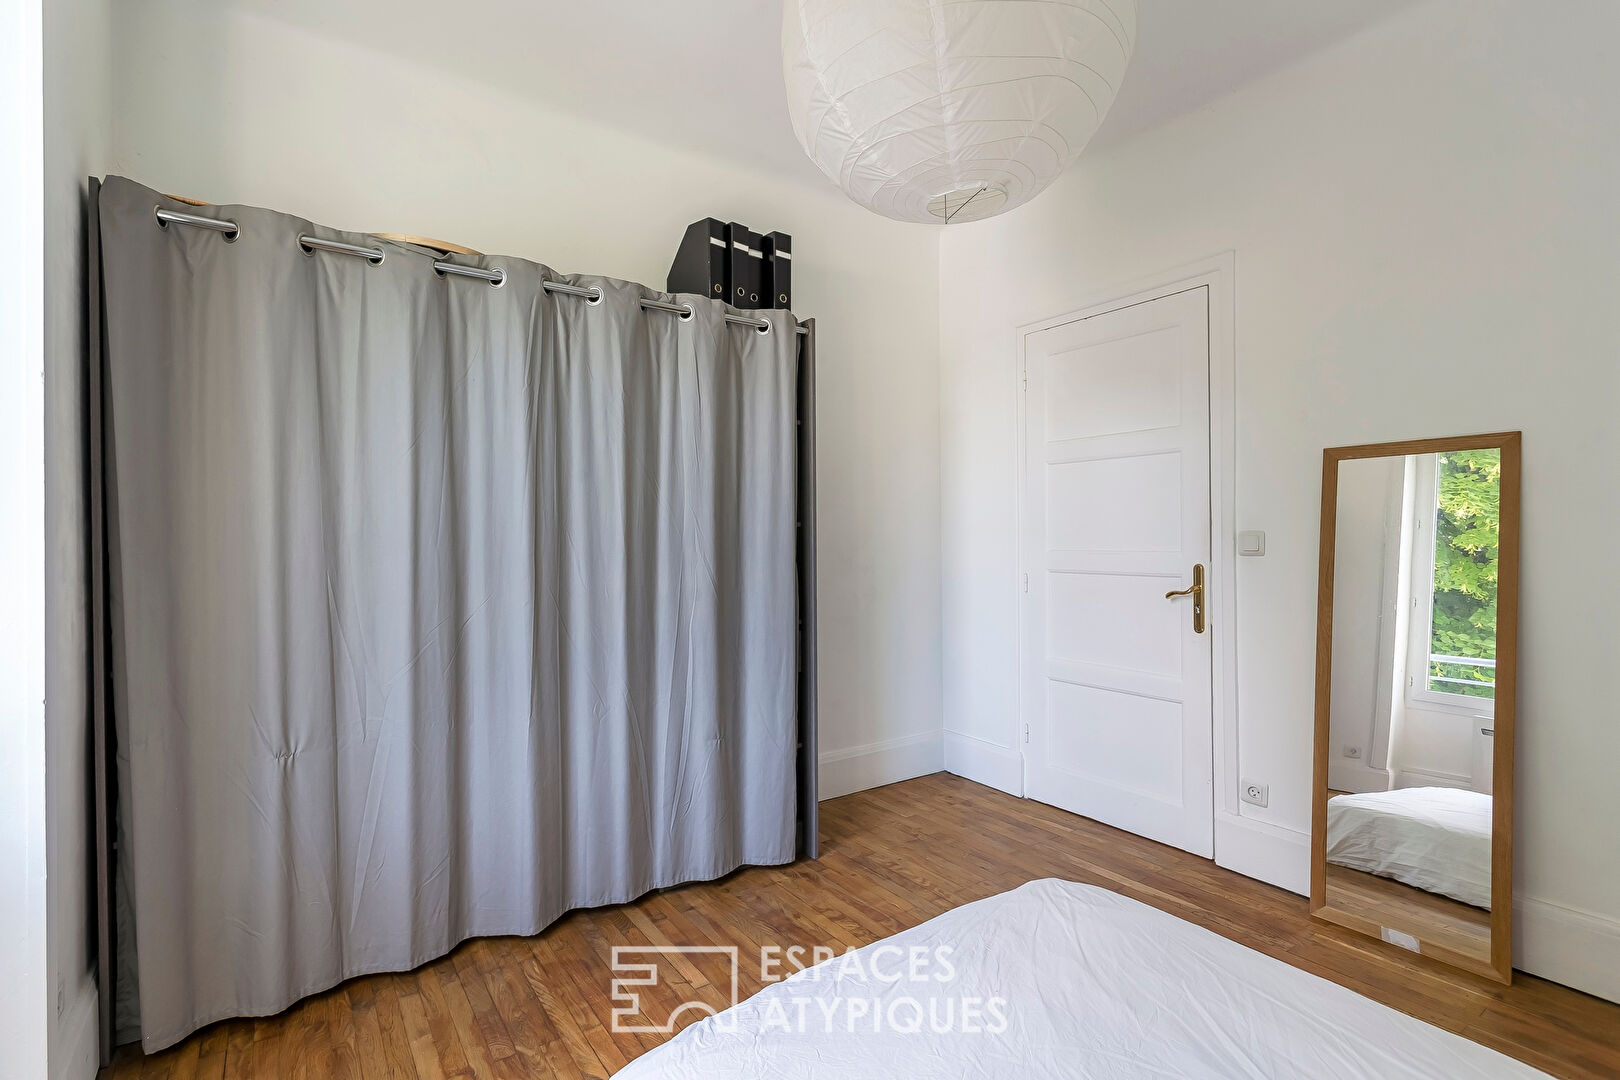 Bright apartment with a view of the Saône